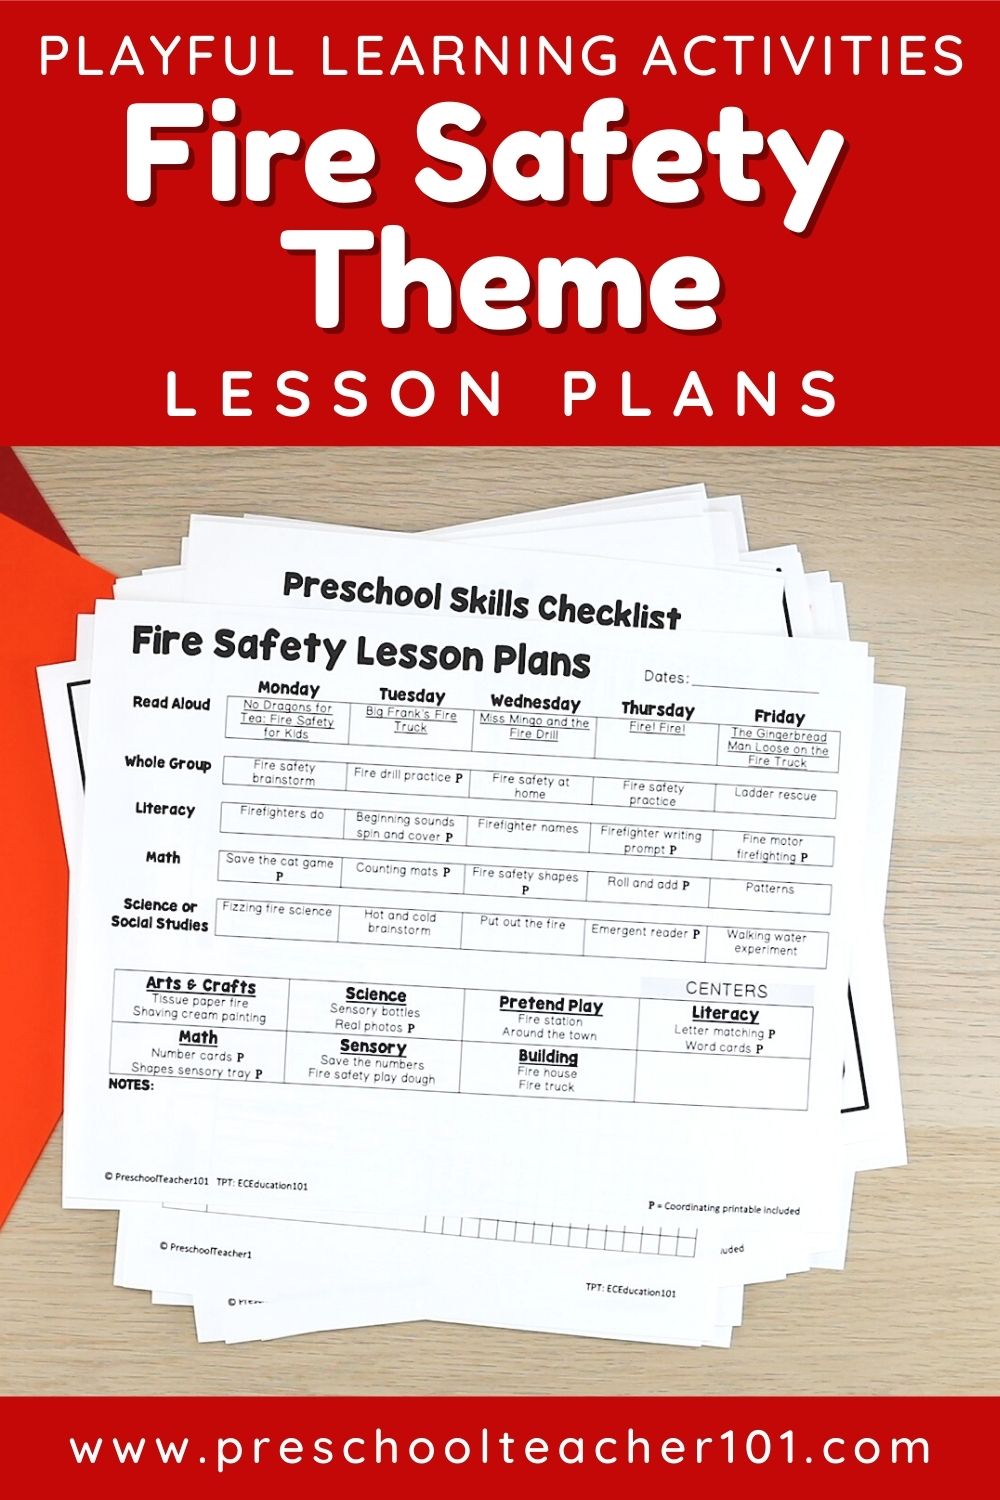 Playful Learning Activities - Fire Safety Theme